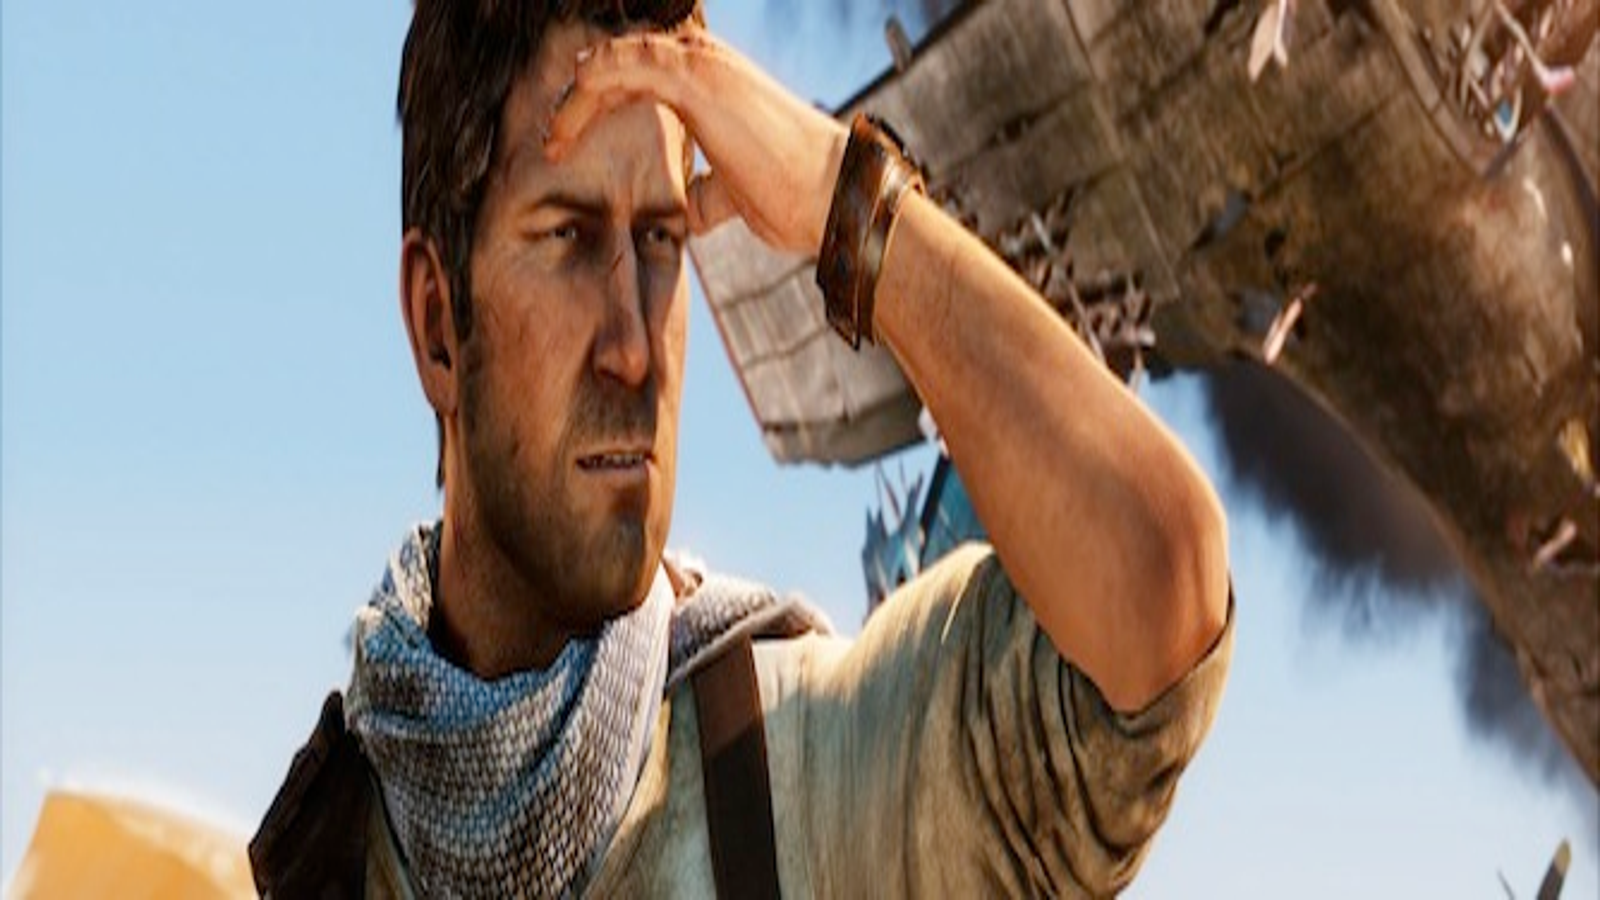 Latest Uncharted 3 Behind-The-Scenes Video Discusses The Relationship  Between Elena And Drake